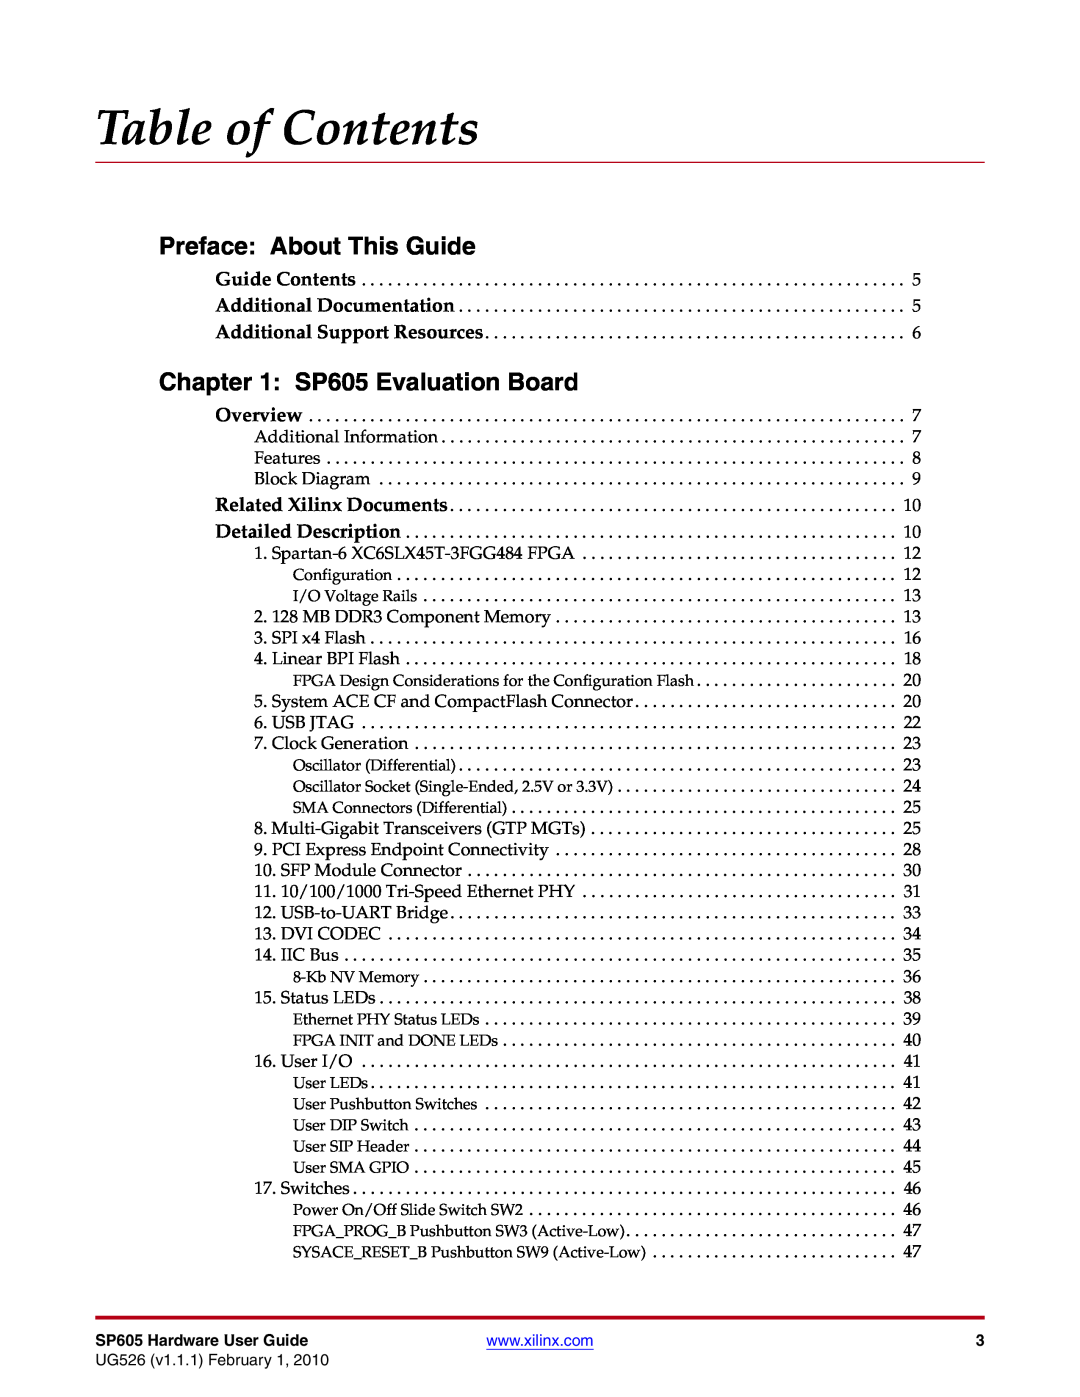 Xilinx manual Table of Contents, Preface About This Guide, SP605 Evaluation Board 